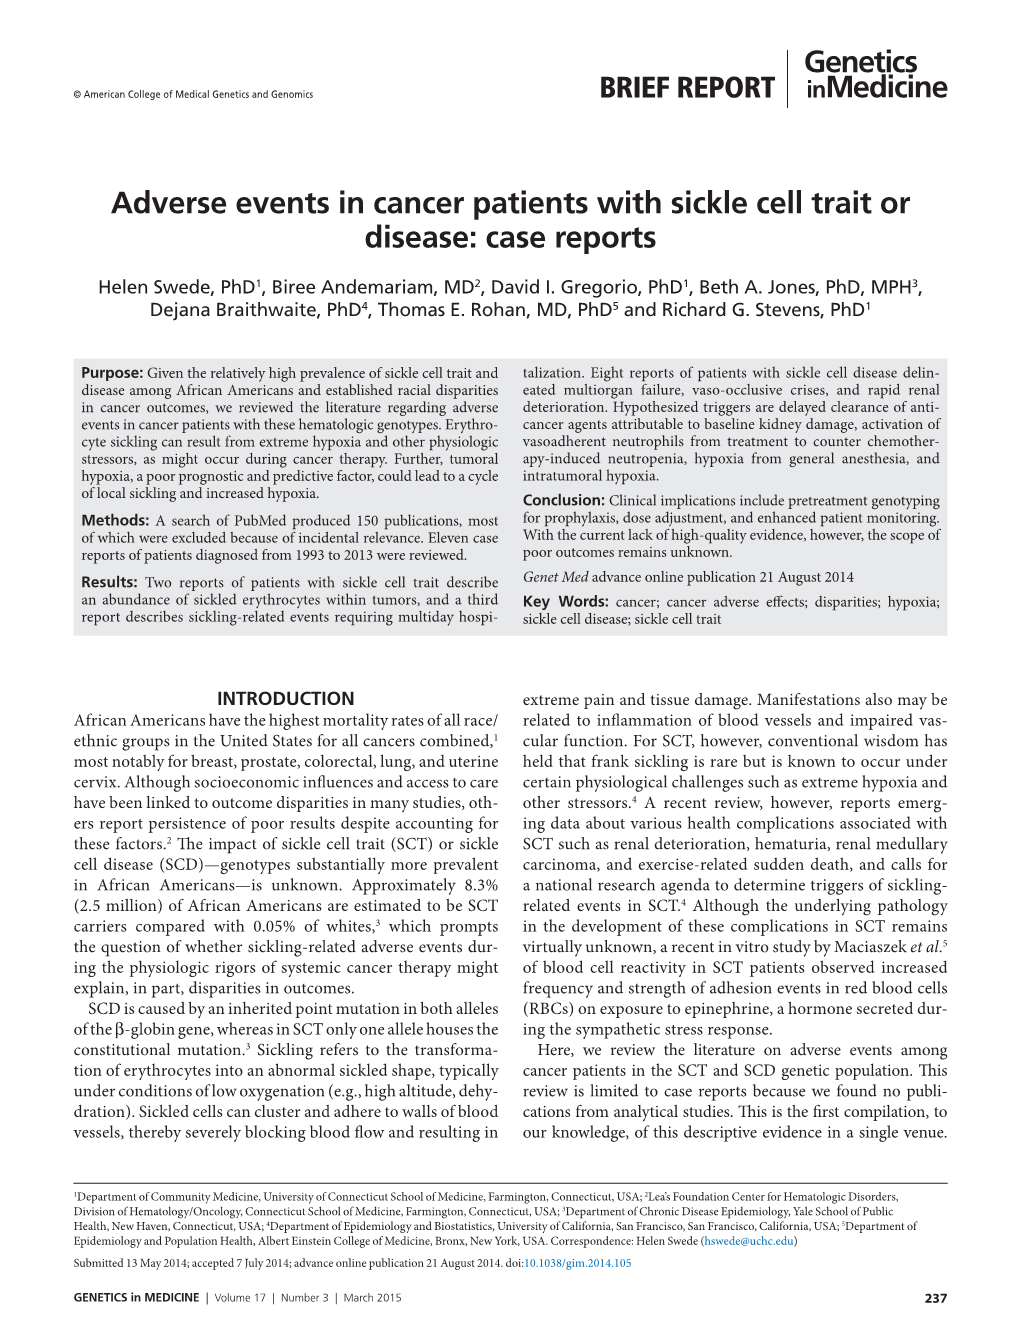 Adverse Events in Cancer Patients with Sickle Cell Trait Or Disease: Case Reports